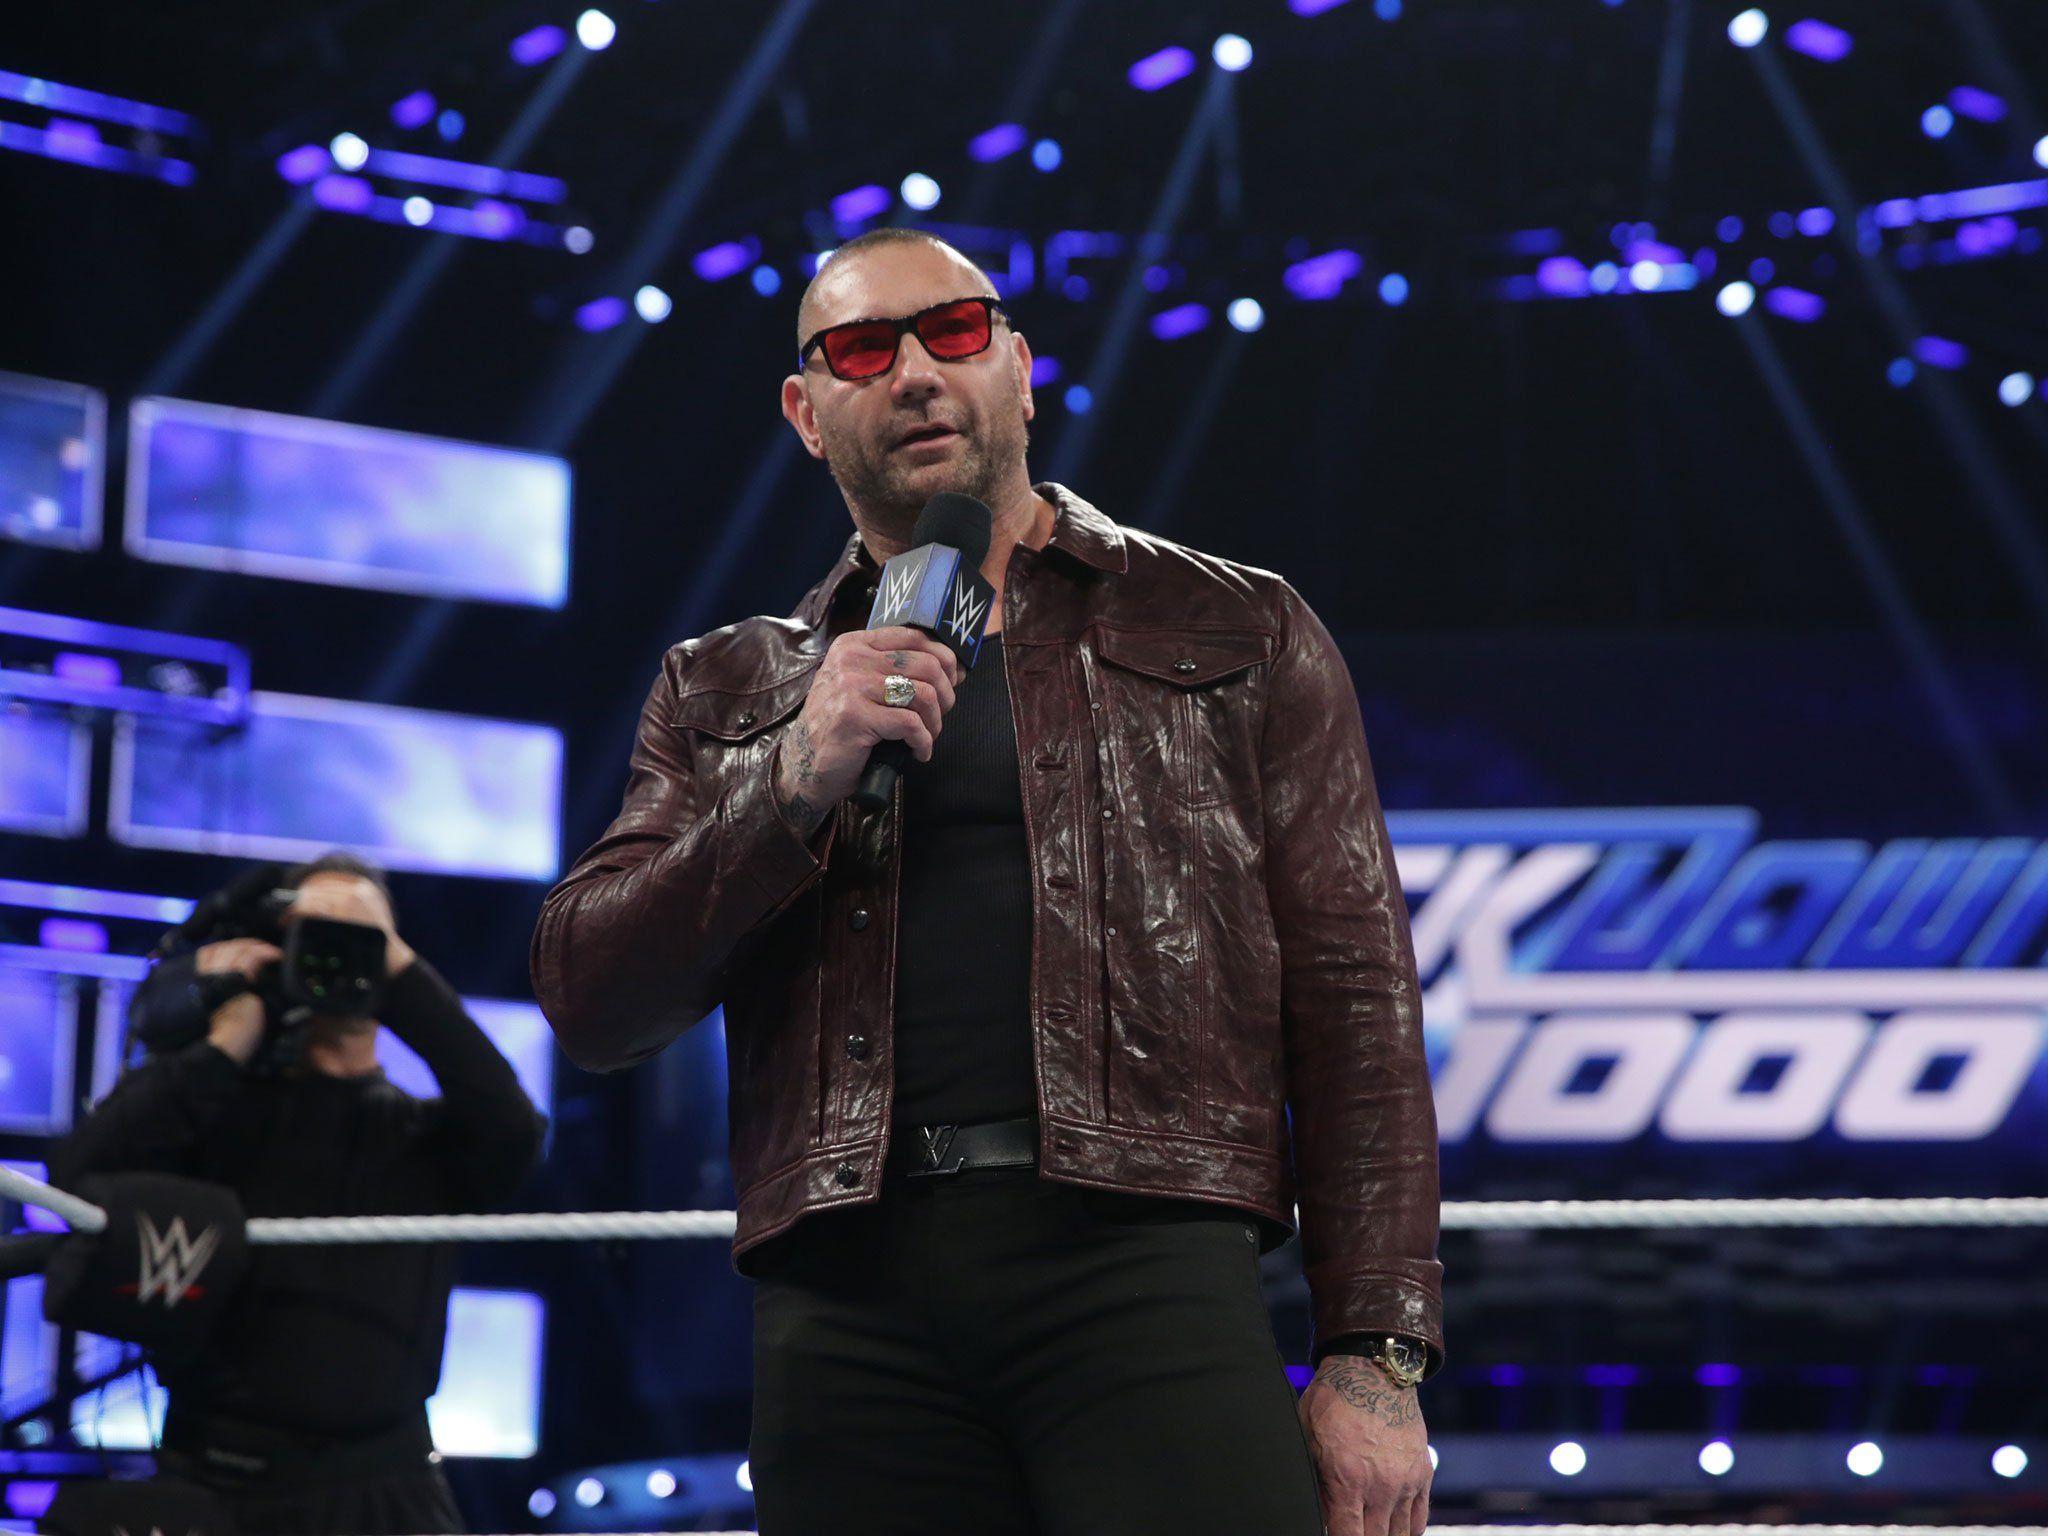 Smackdown 000: Hollywood star Batista returns to set up feud